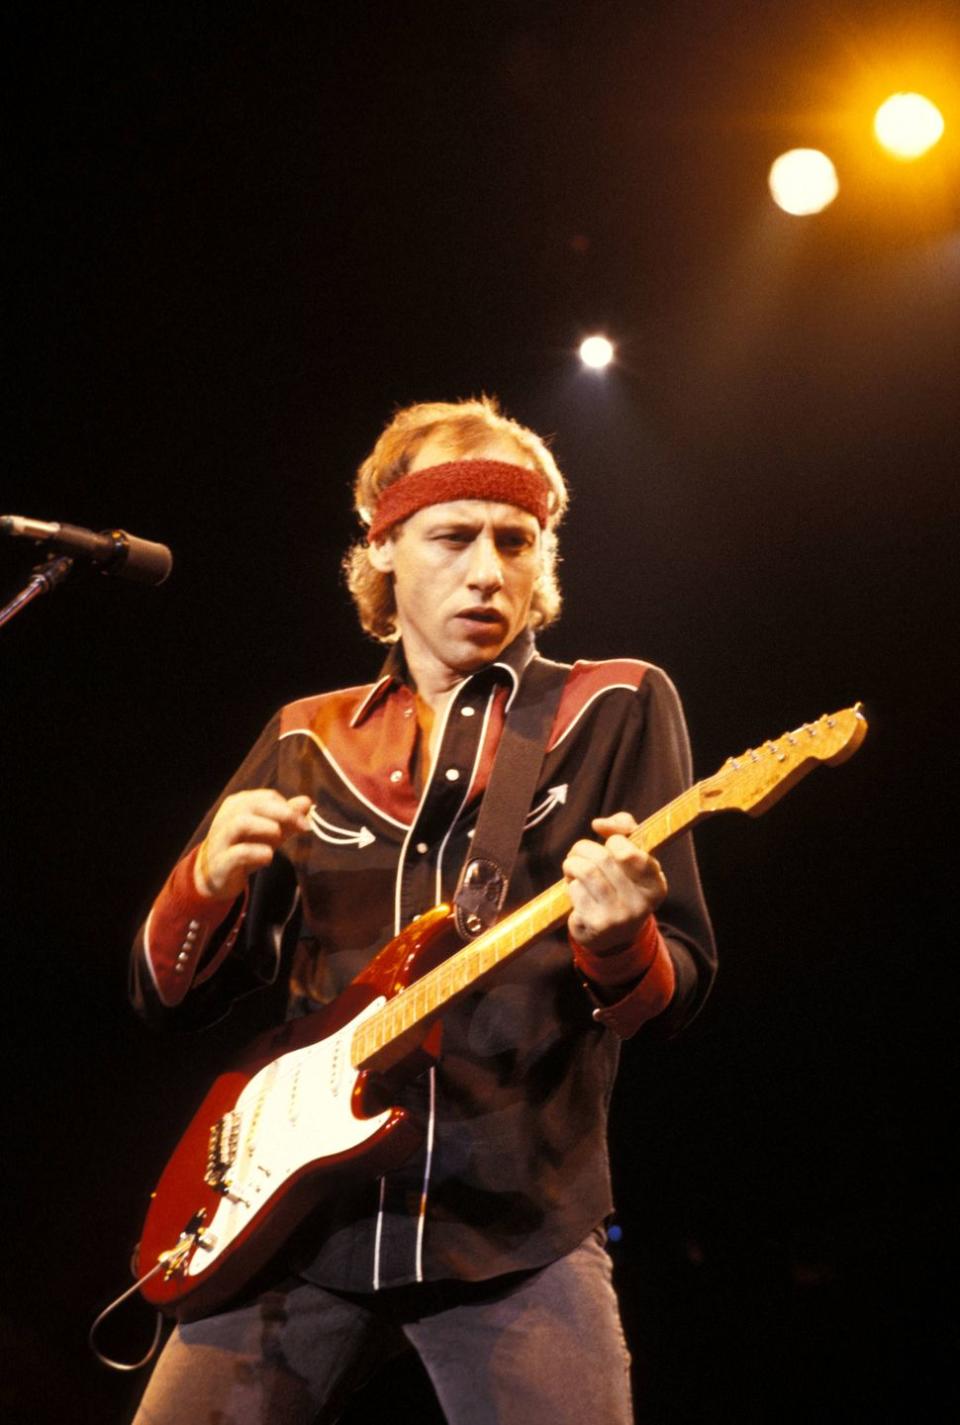 'Money for Nothing' by Dire Straits